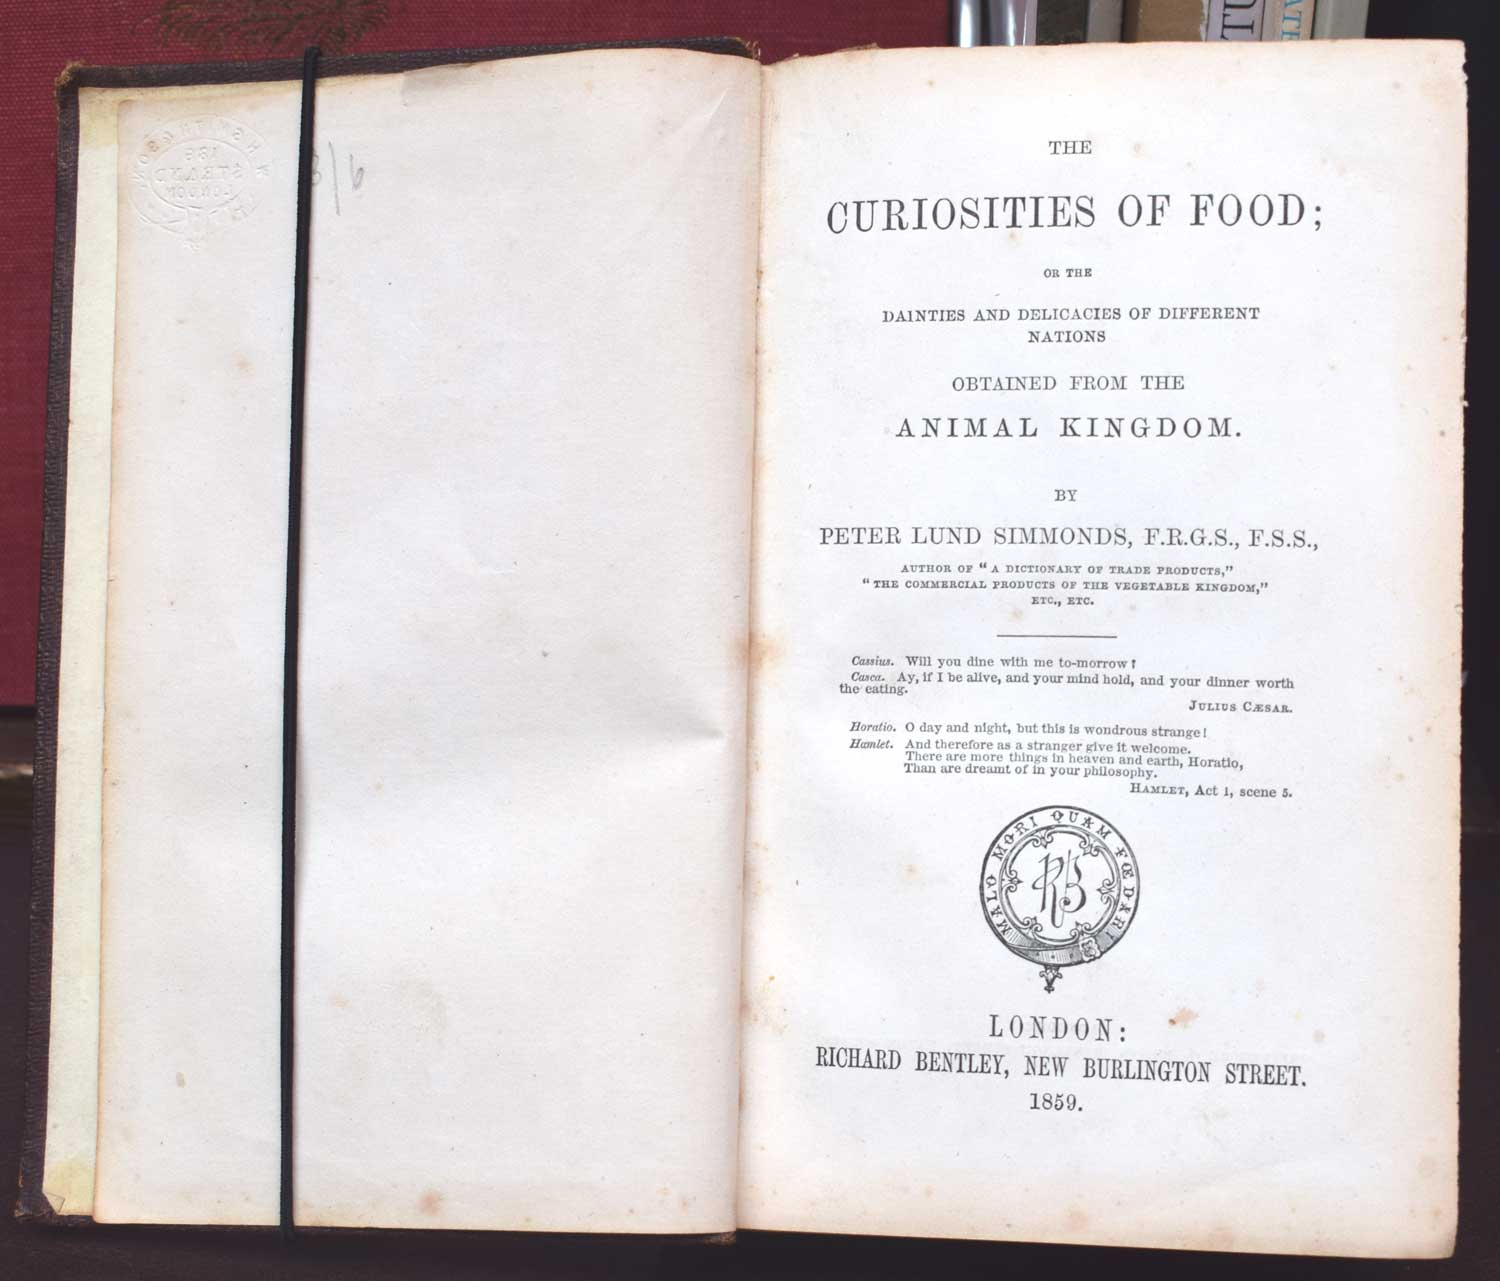 The Curiosities of Food; or The Dainties and Delicacies of Different Nations Obtained from the Animal Kingdom